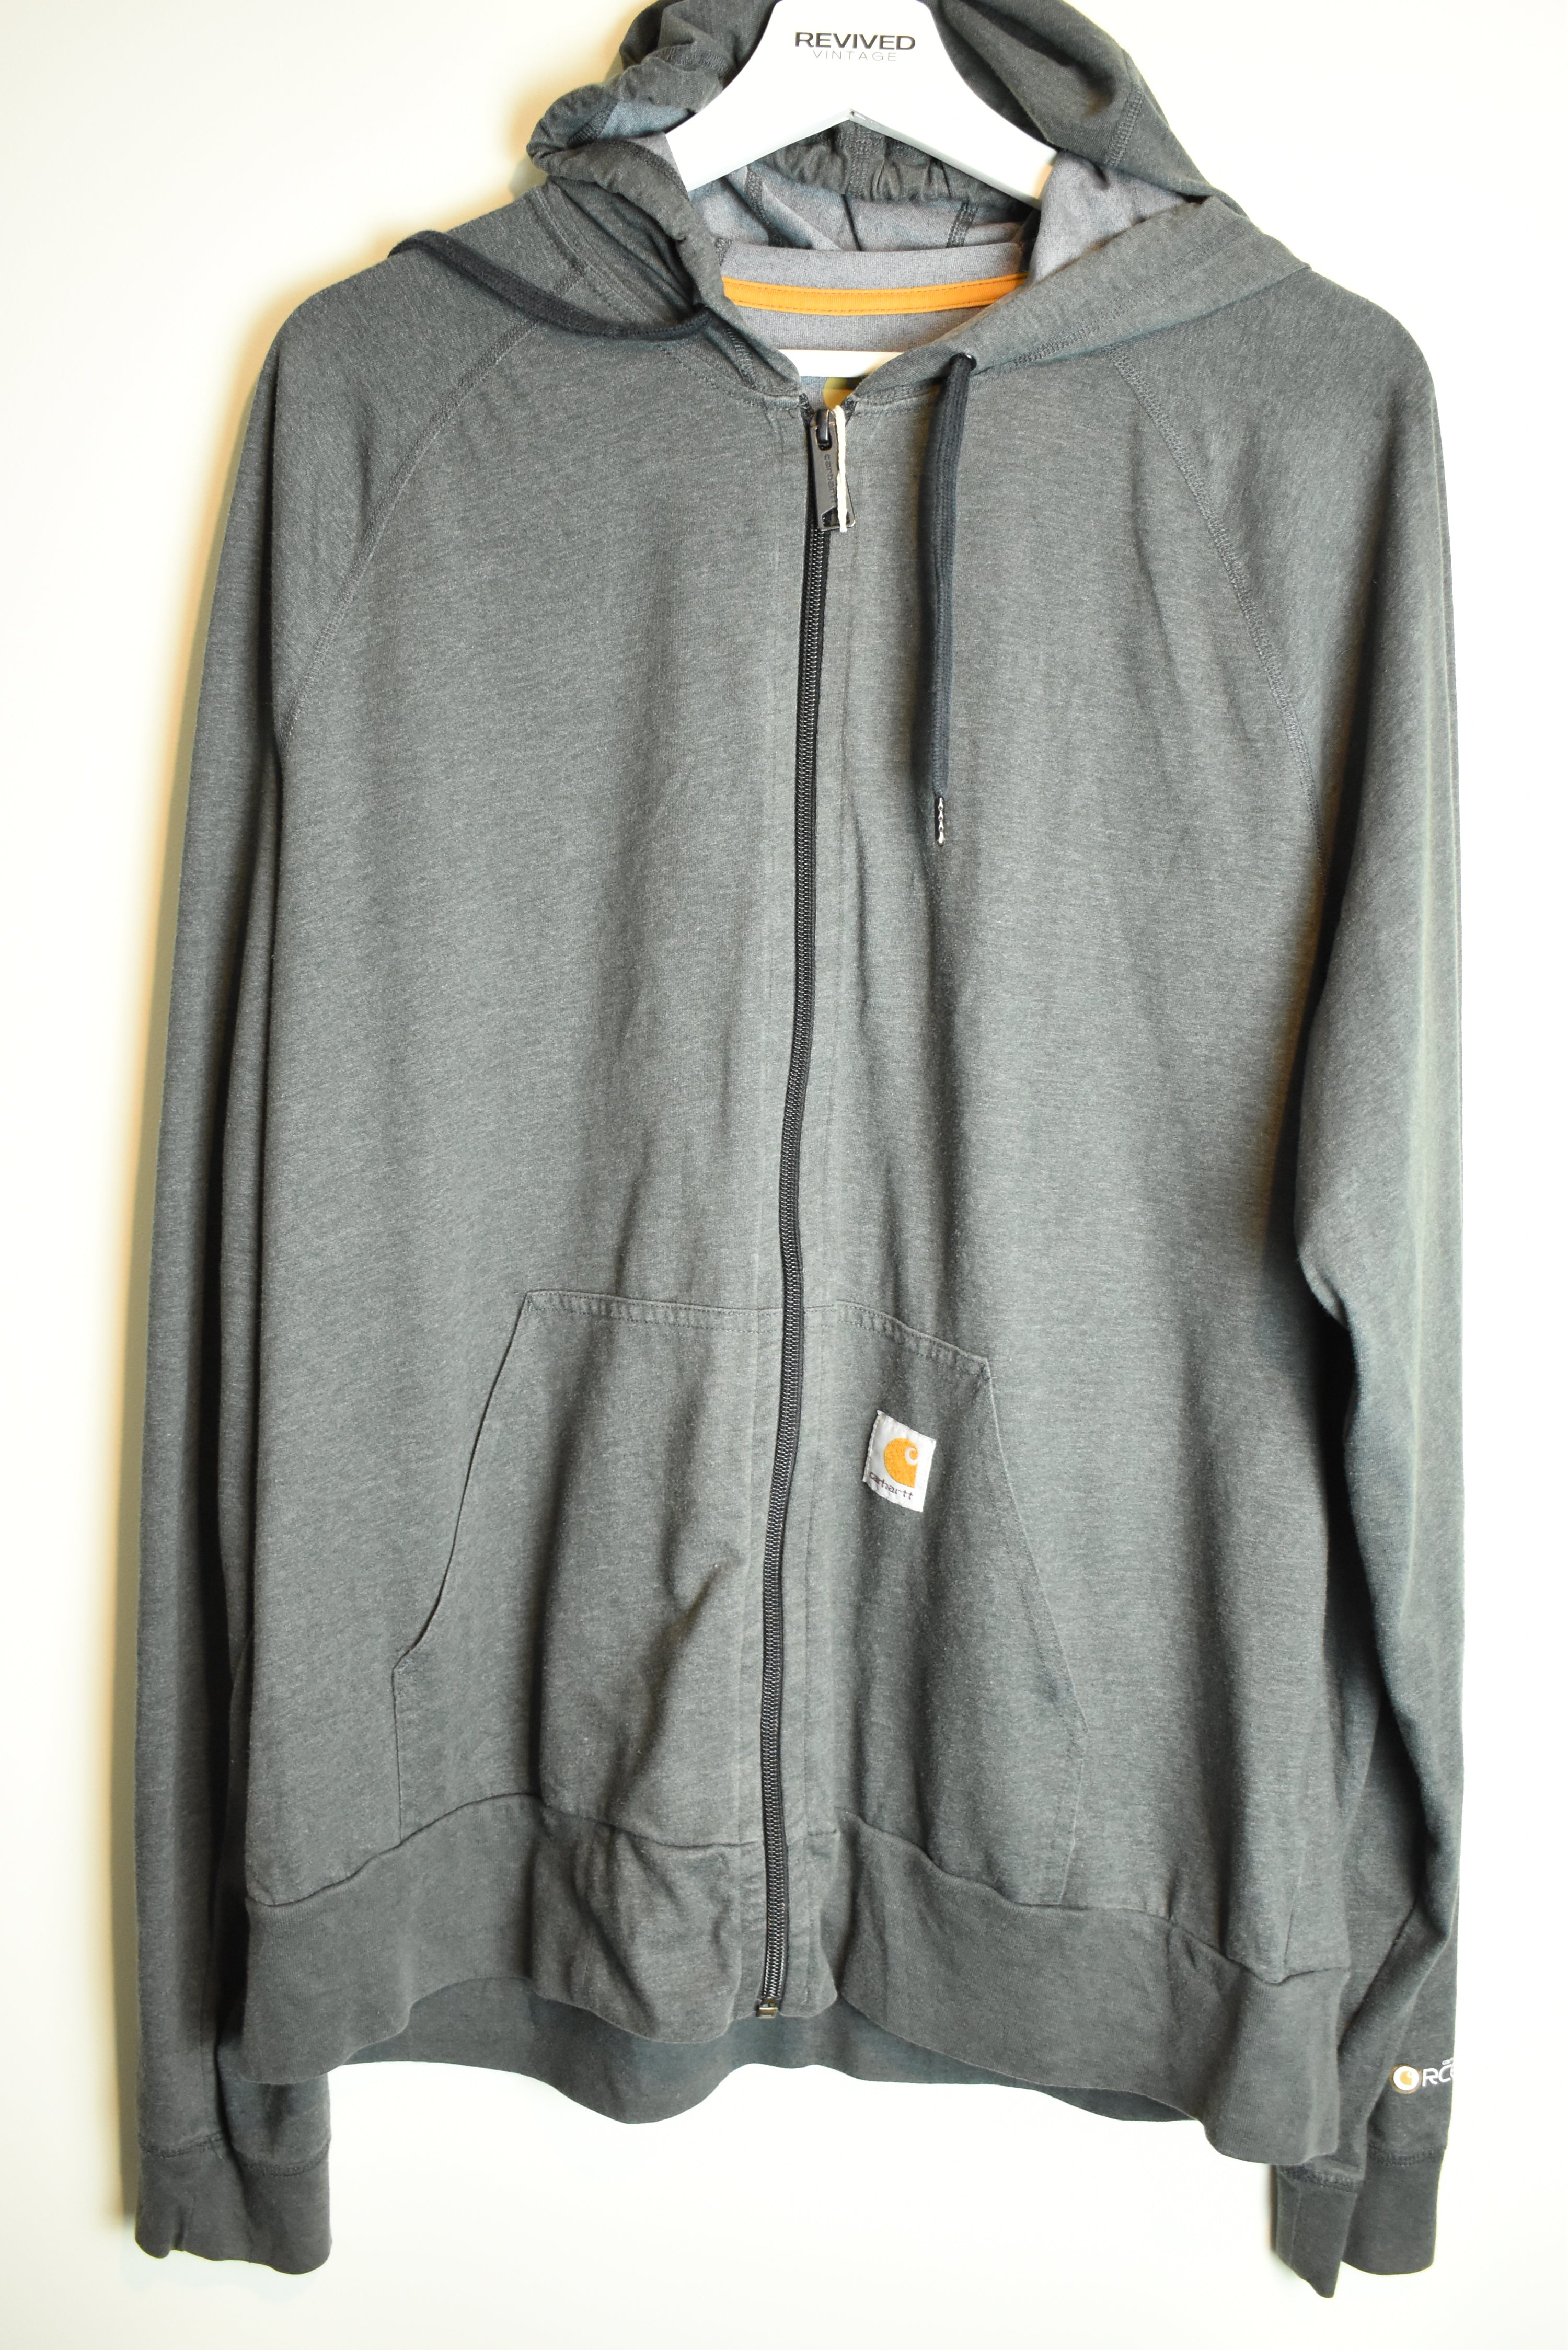 Vintage Carhartt Grey Full Zip Jacket Relaxed Fit Large